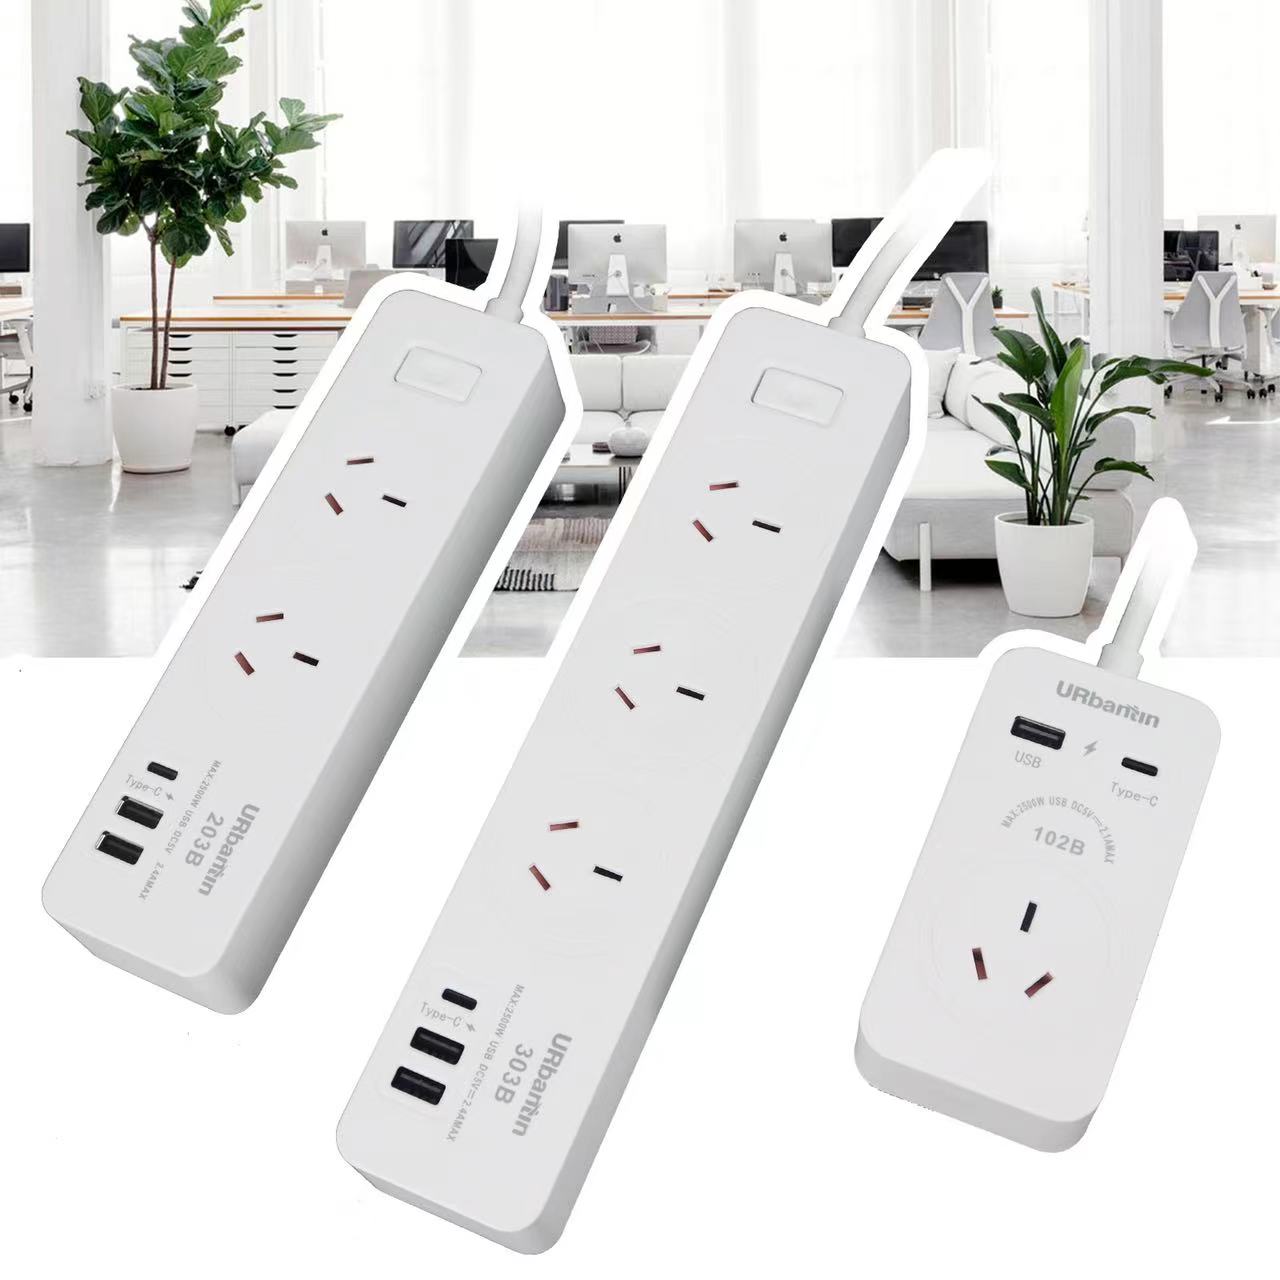 URBANTIN 3 Way Powerboard With USB A/USB Type C Charging Ports 1.8M Power